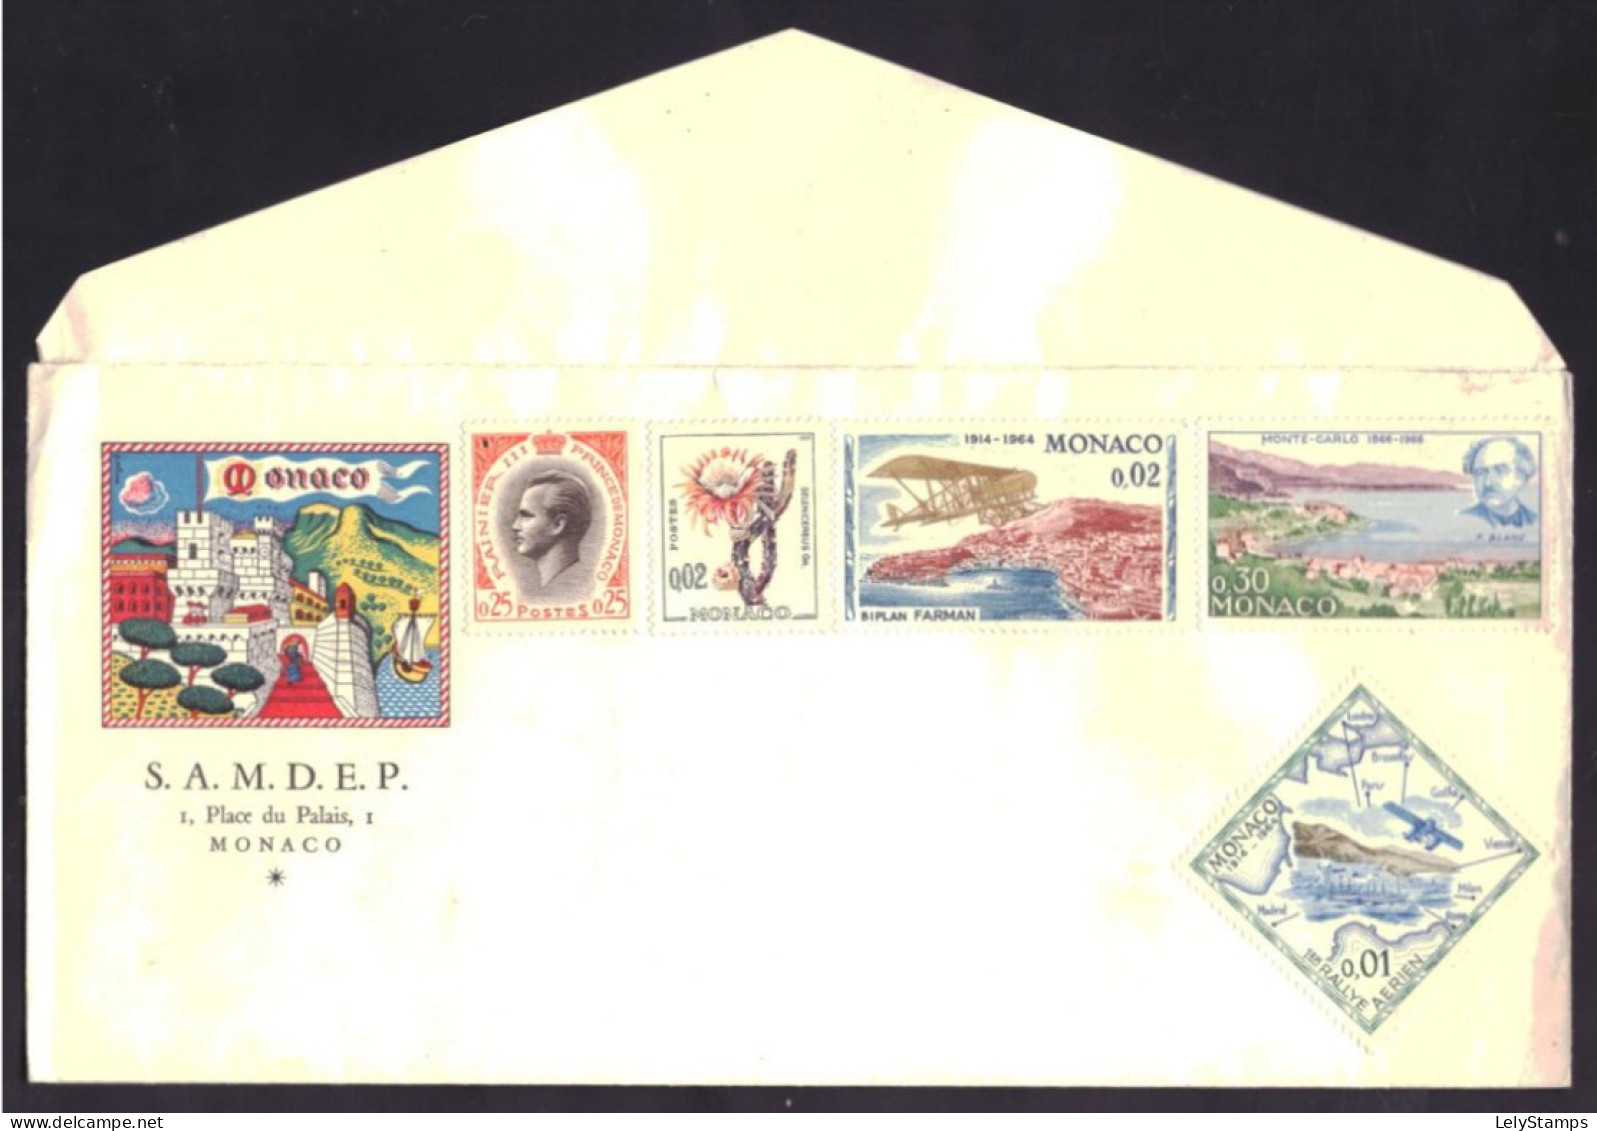 Monaco Cover FDC Multiple Stamps No Adress (1964 - 1966) - FDC